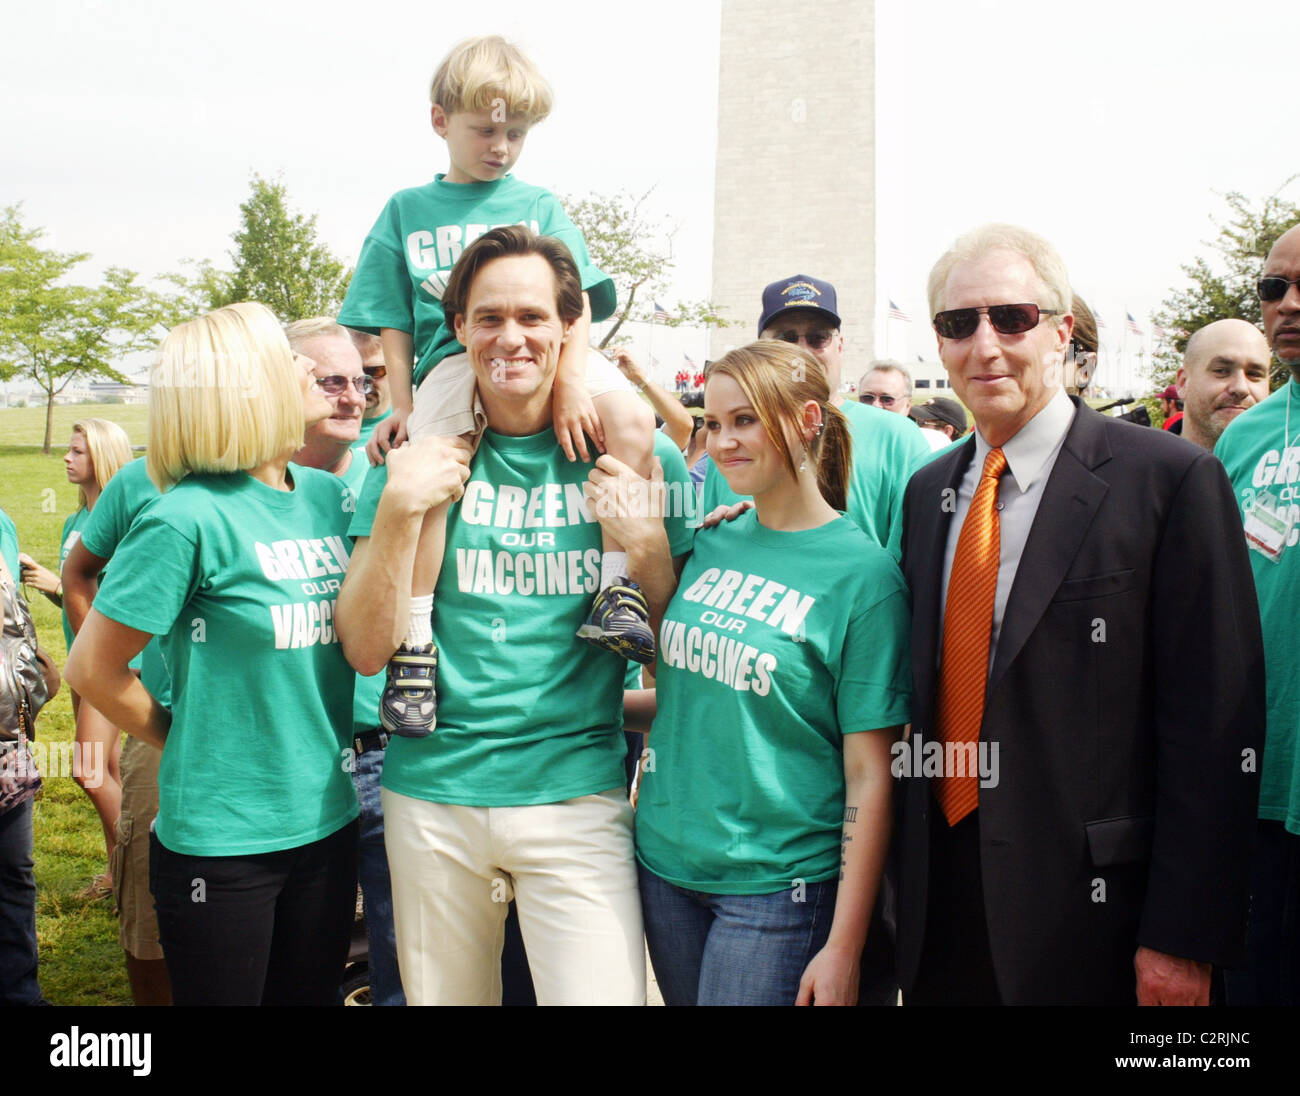 Jenny McCarthy, Evan McCarthy, Jim Carrey and Jane Carrey lead the 'Green Our Vaccines' march, rally and press conference at Stock Photo